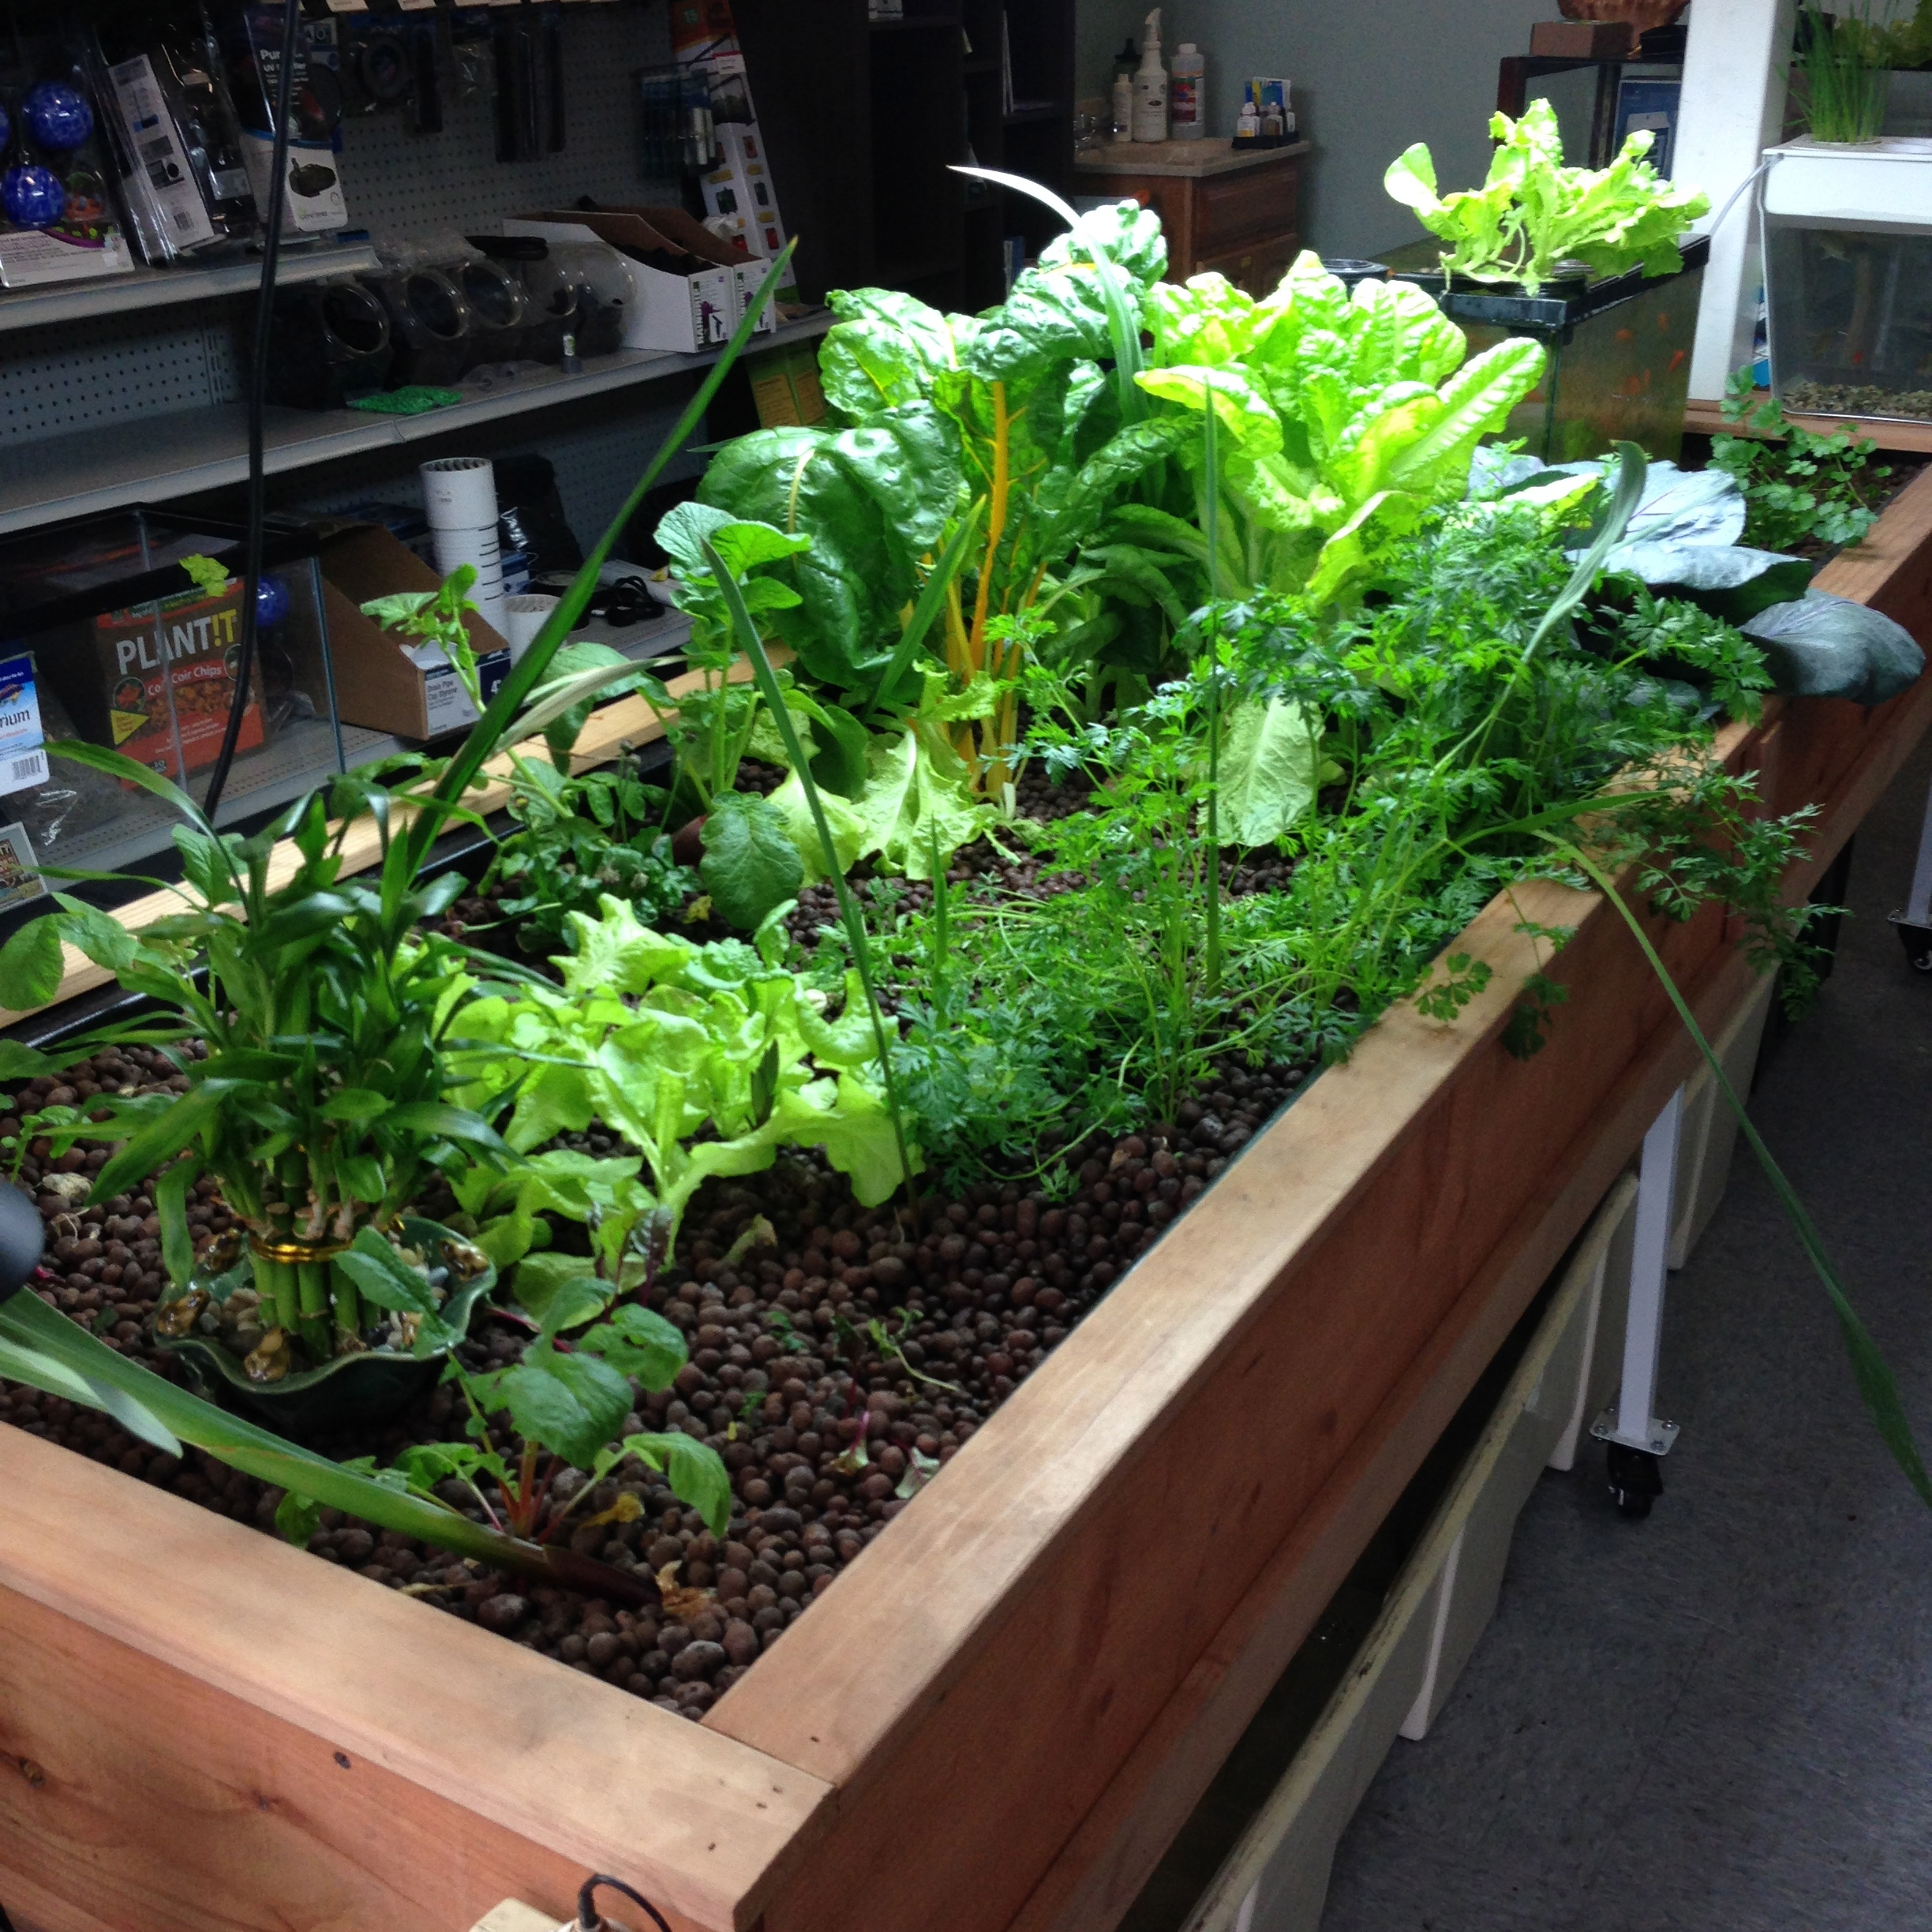 Aquaponics | A Girl and A Garden